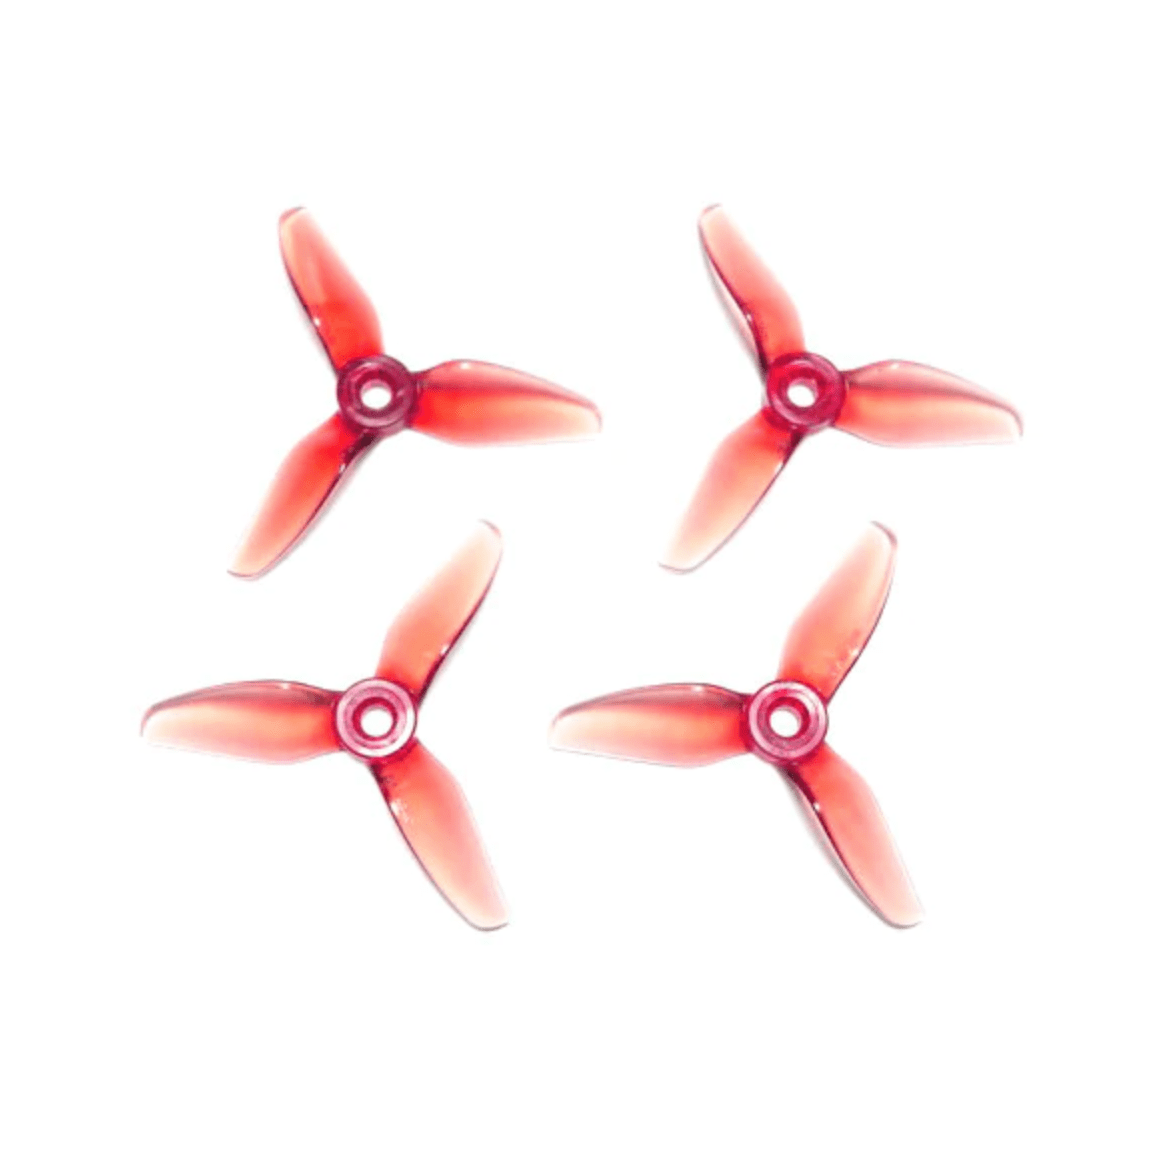 HQ Prop  3X4X3 Propellers 1 Pack (4 Pieces) Black